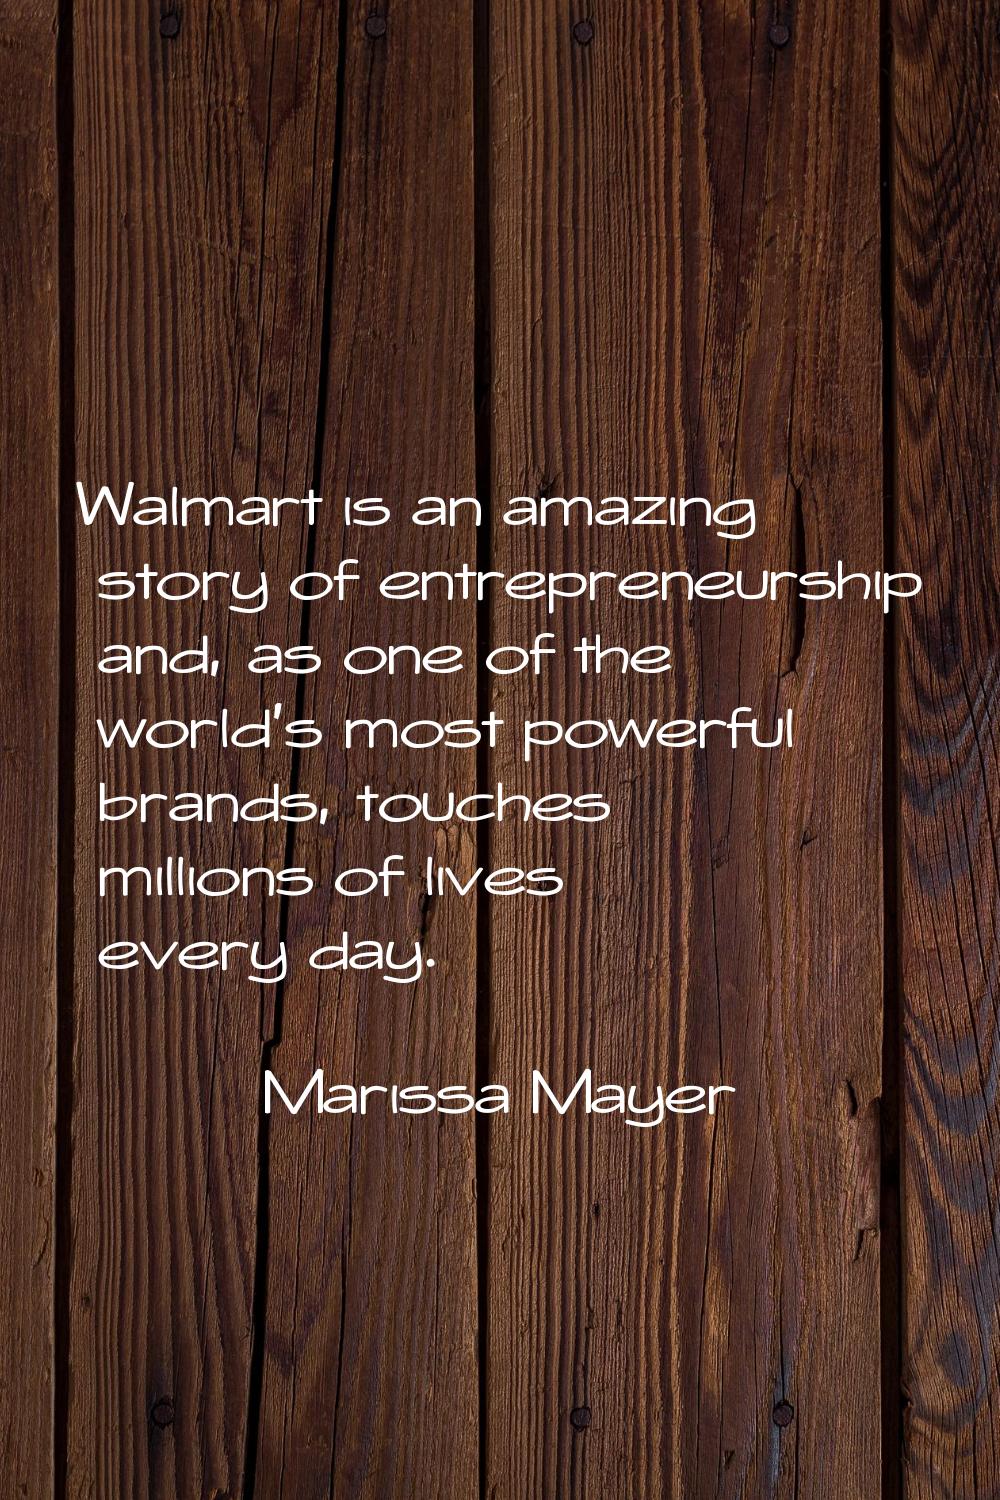 Walmart is an amazing story of entrepreneurship and, as one of the world's most powerful brands, to